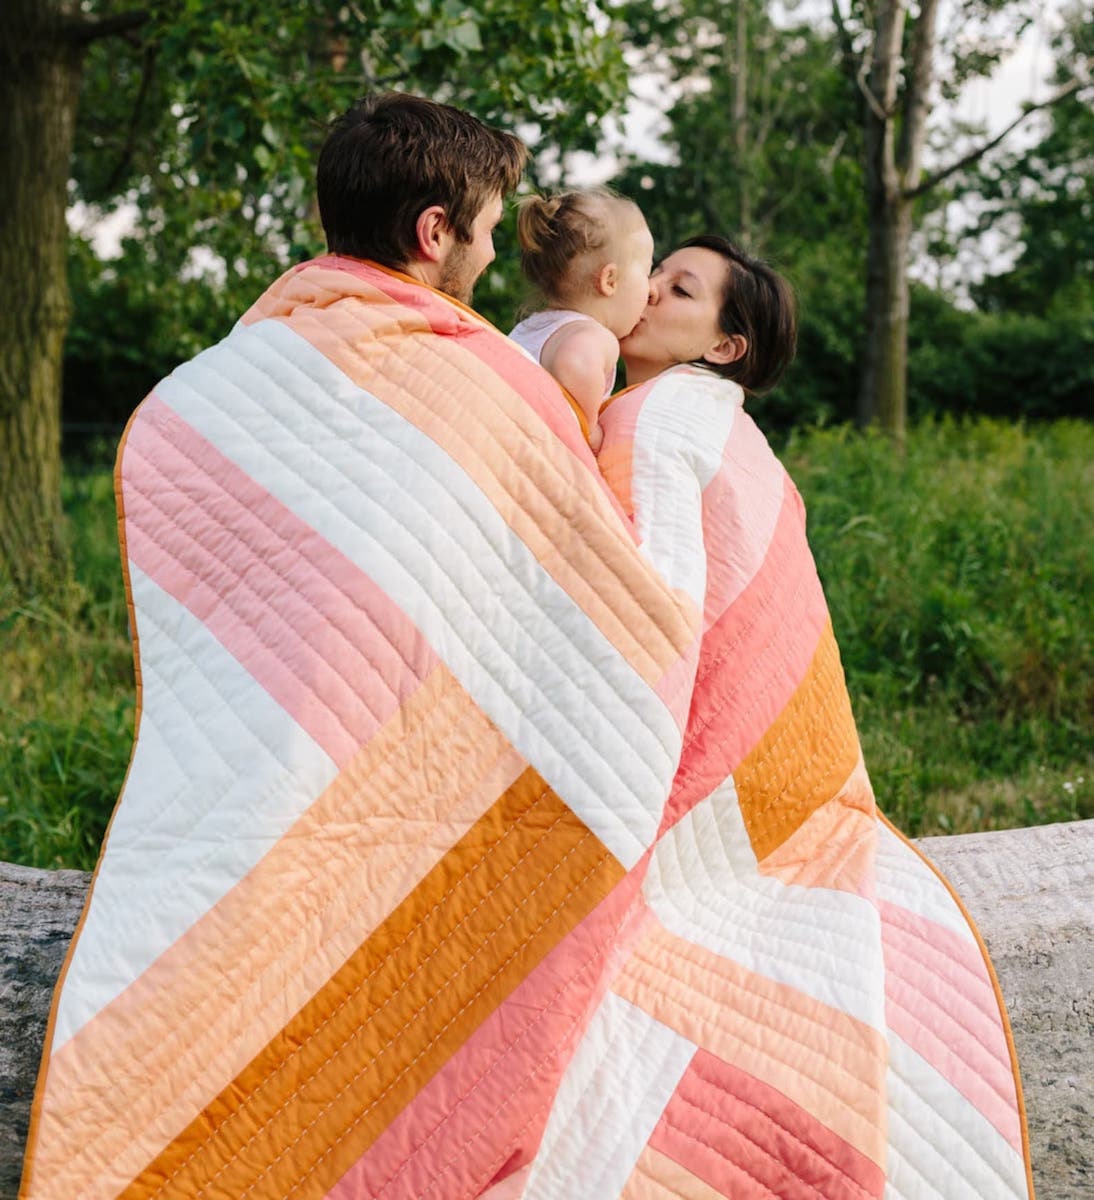 A warm, ombré striped quilt pattern from Etsy